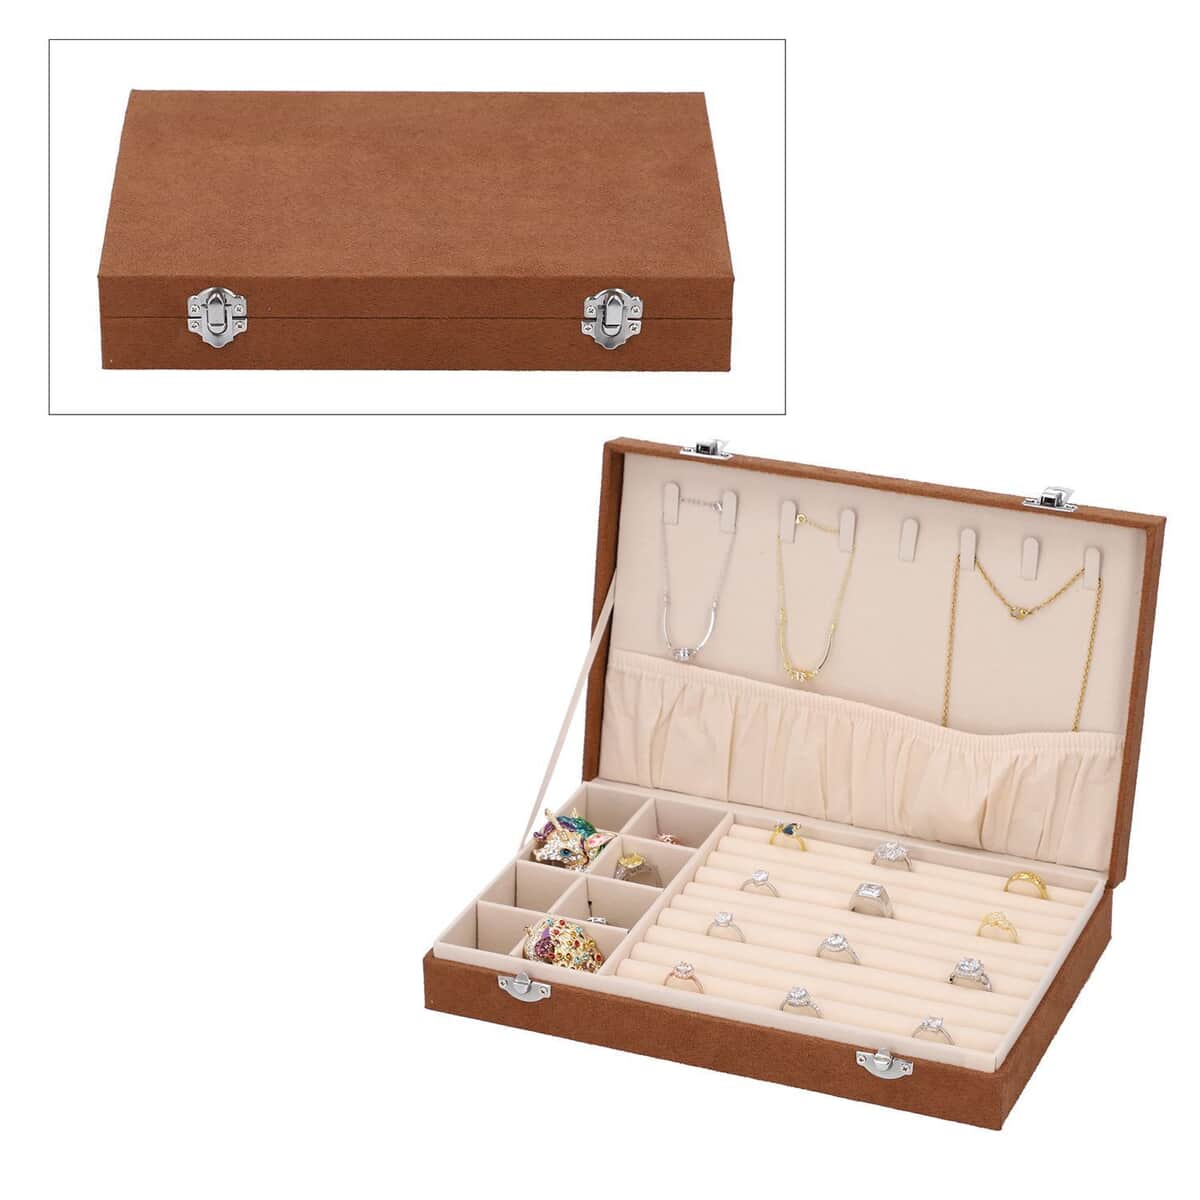 Brown Velvet Jewelry Box with Anti Tarnish Lining & Lock, Anti Tarnish Jewelry Case, Jewelry Organizer, Jewelry Storage Box (8 Necklace Hooks, 8 Earrings/Pendant Sections and 10 Rings Slots) image number 0